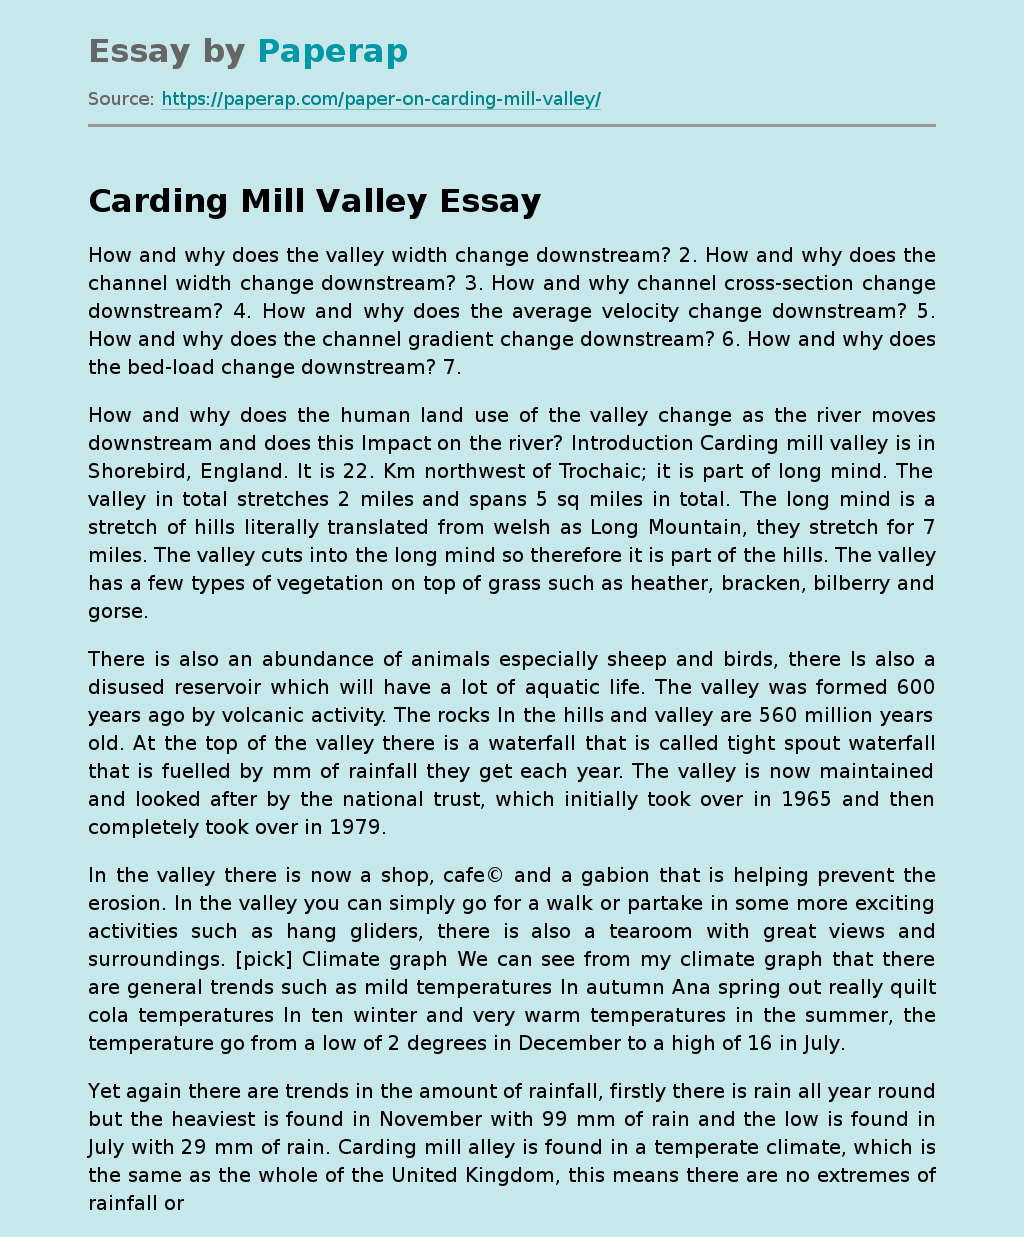 Description of the English Valley Carding Mill